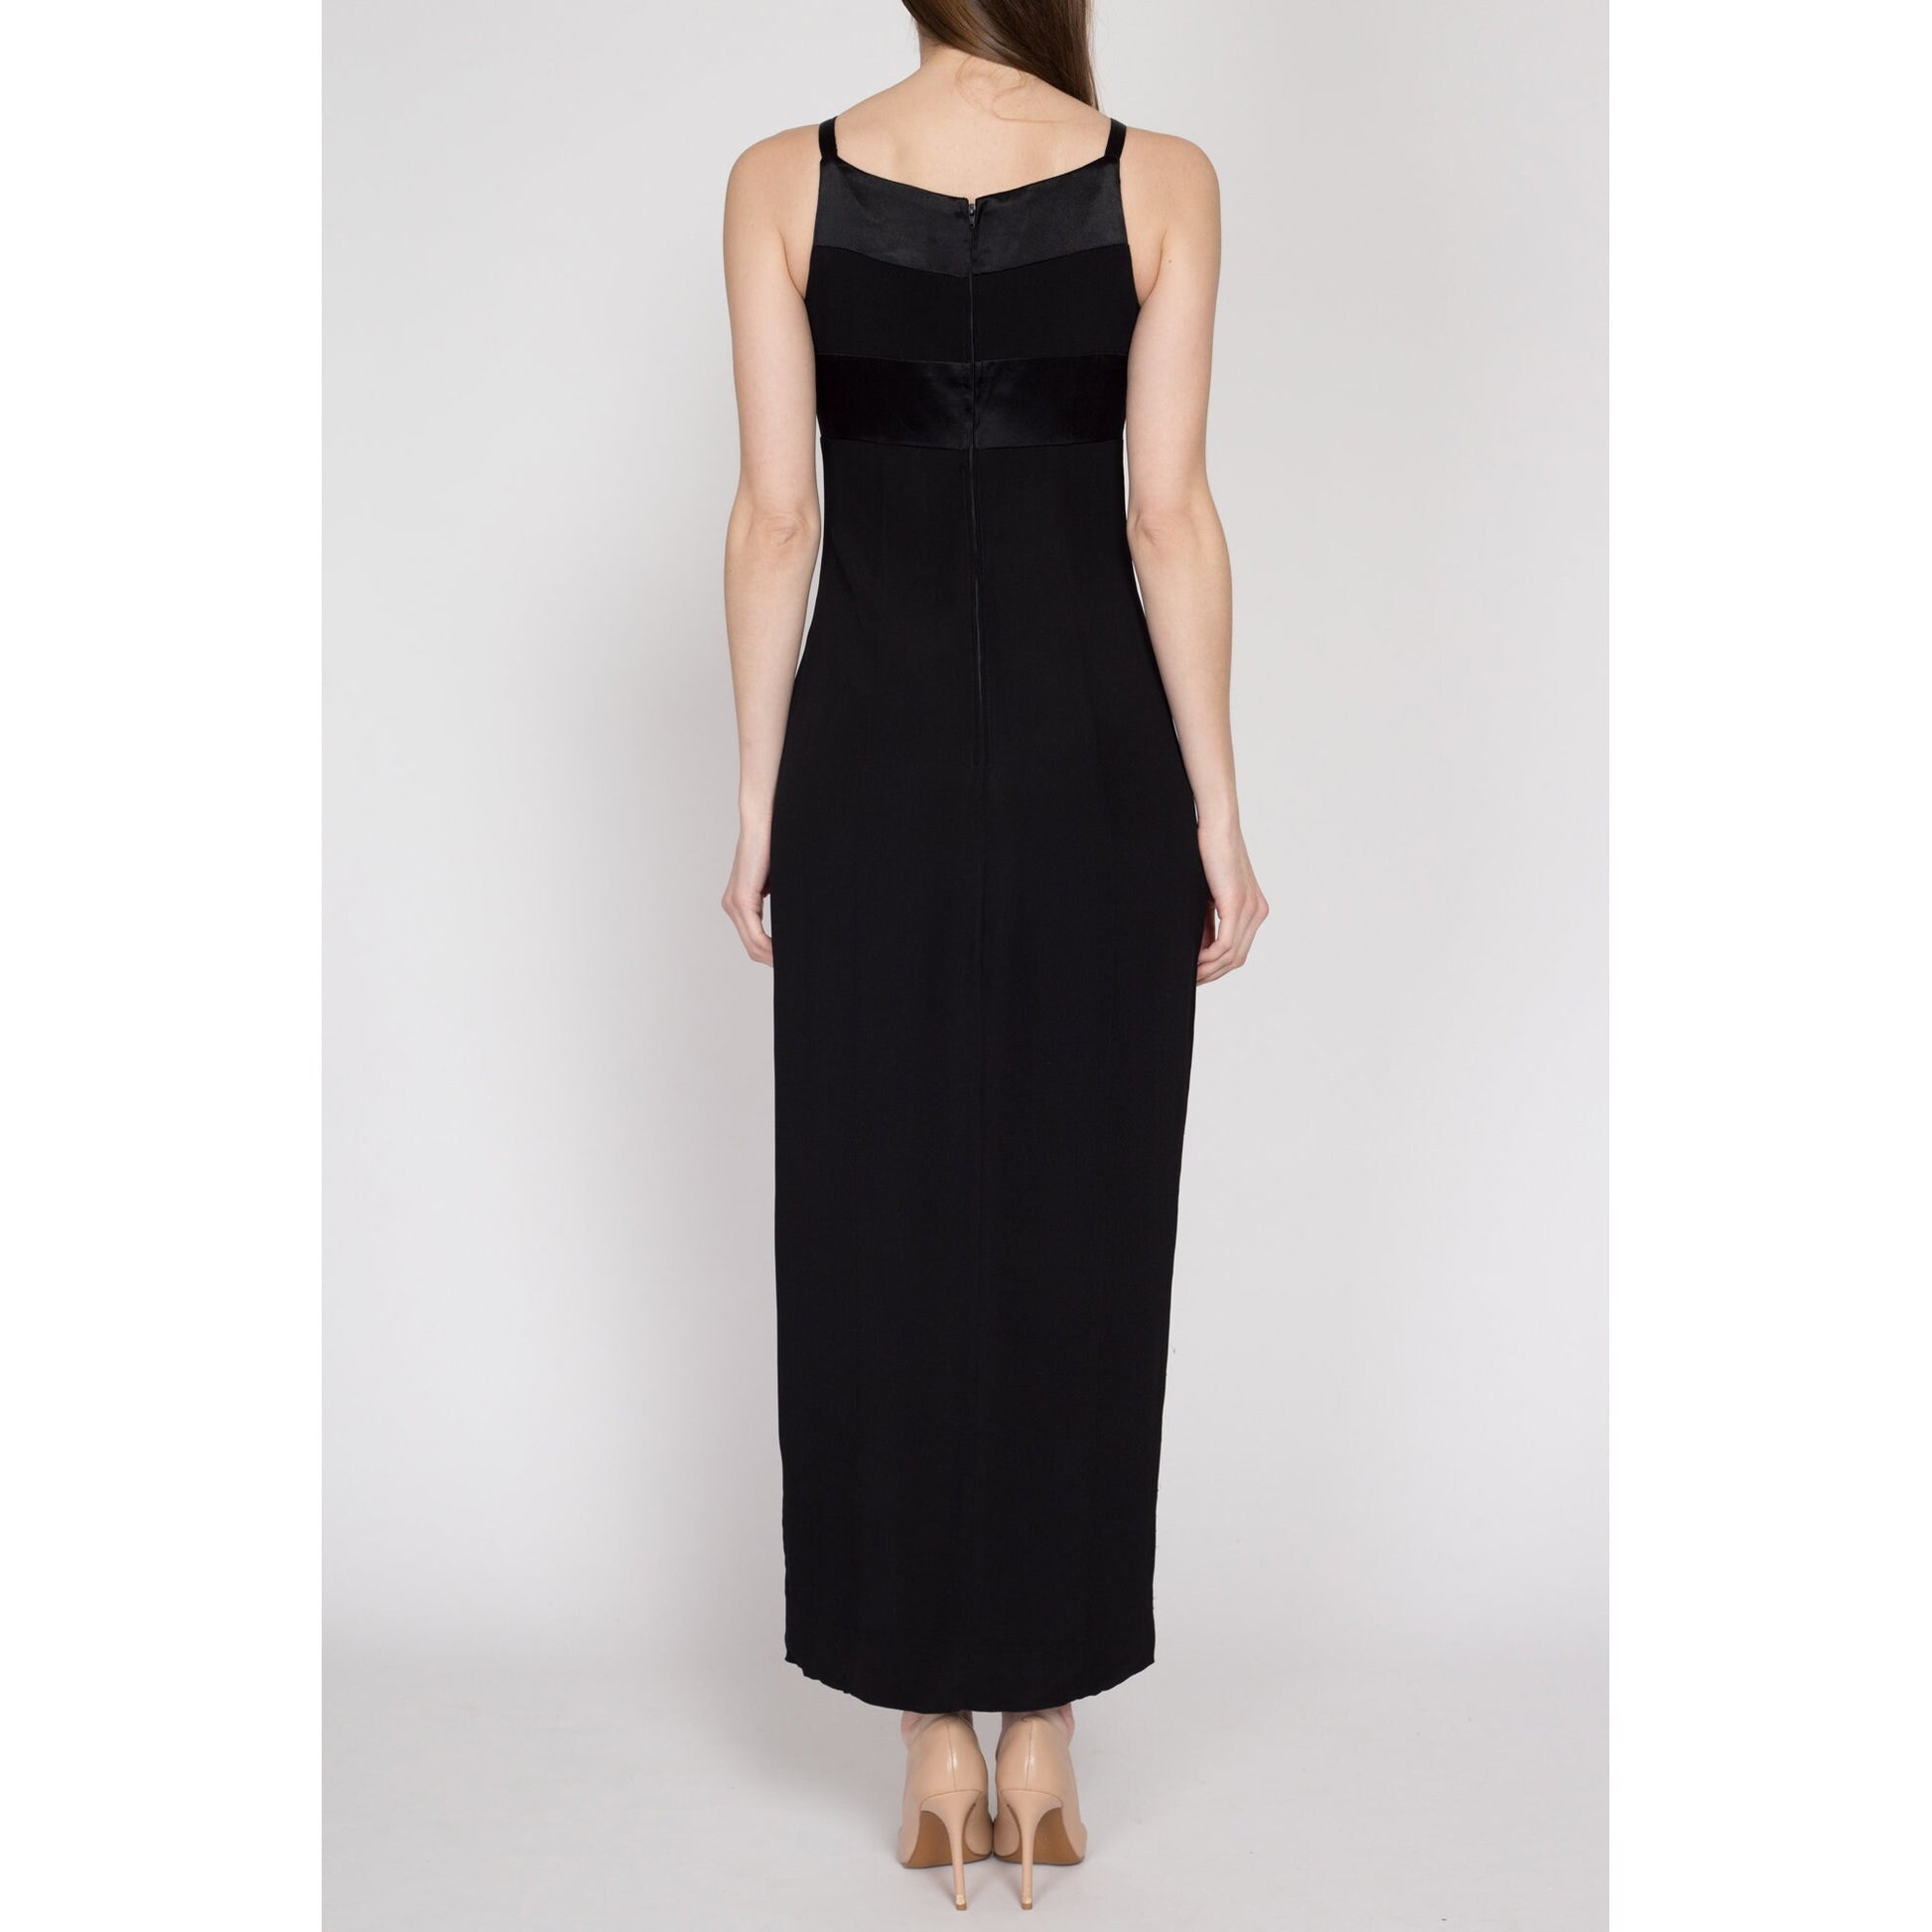 Small 90s Dave & Johnny Black Satin Trim Maxi Dress | Vintage High Slit Sleeveless Fitted Formal Evening Gown